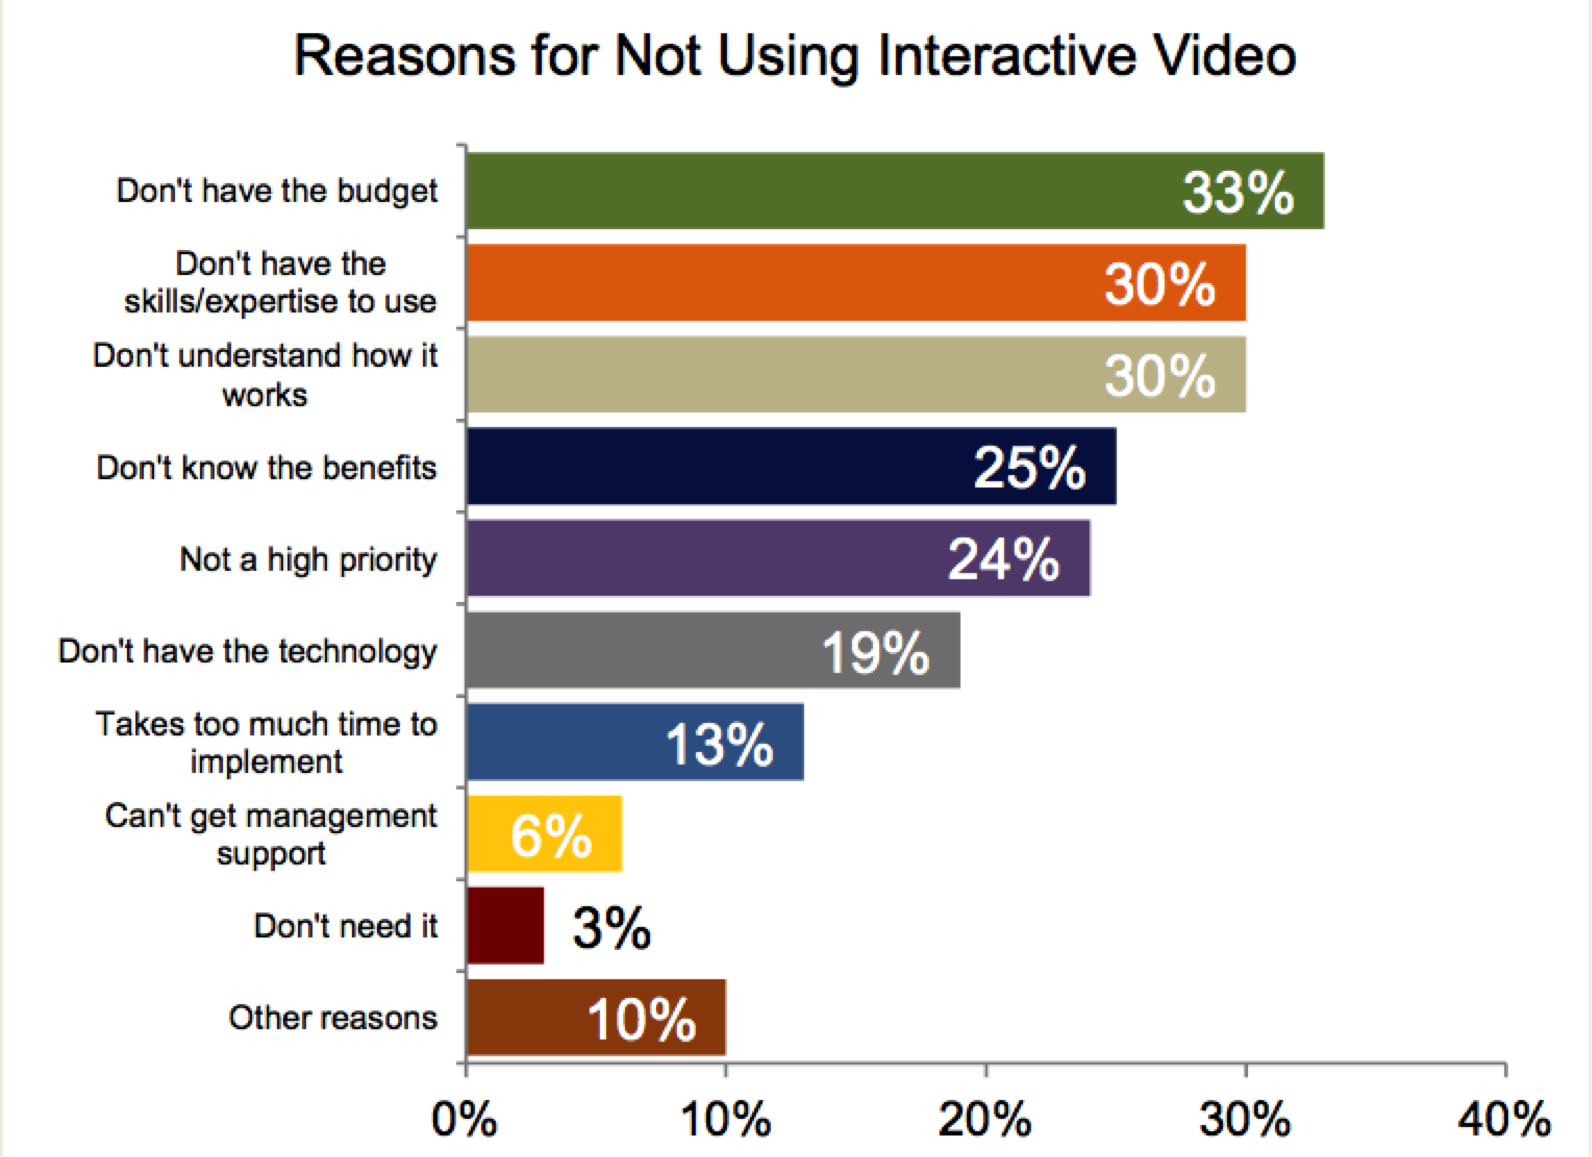 Bar graph depicting reasons for not using interactive video